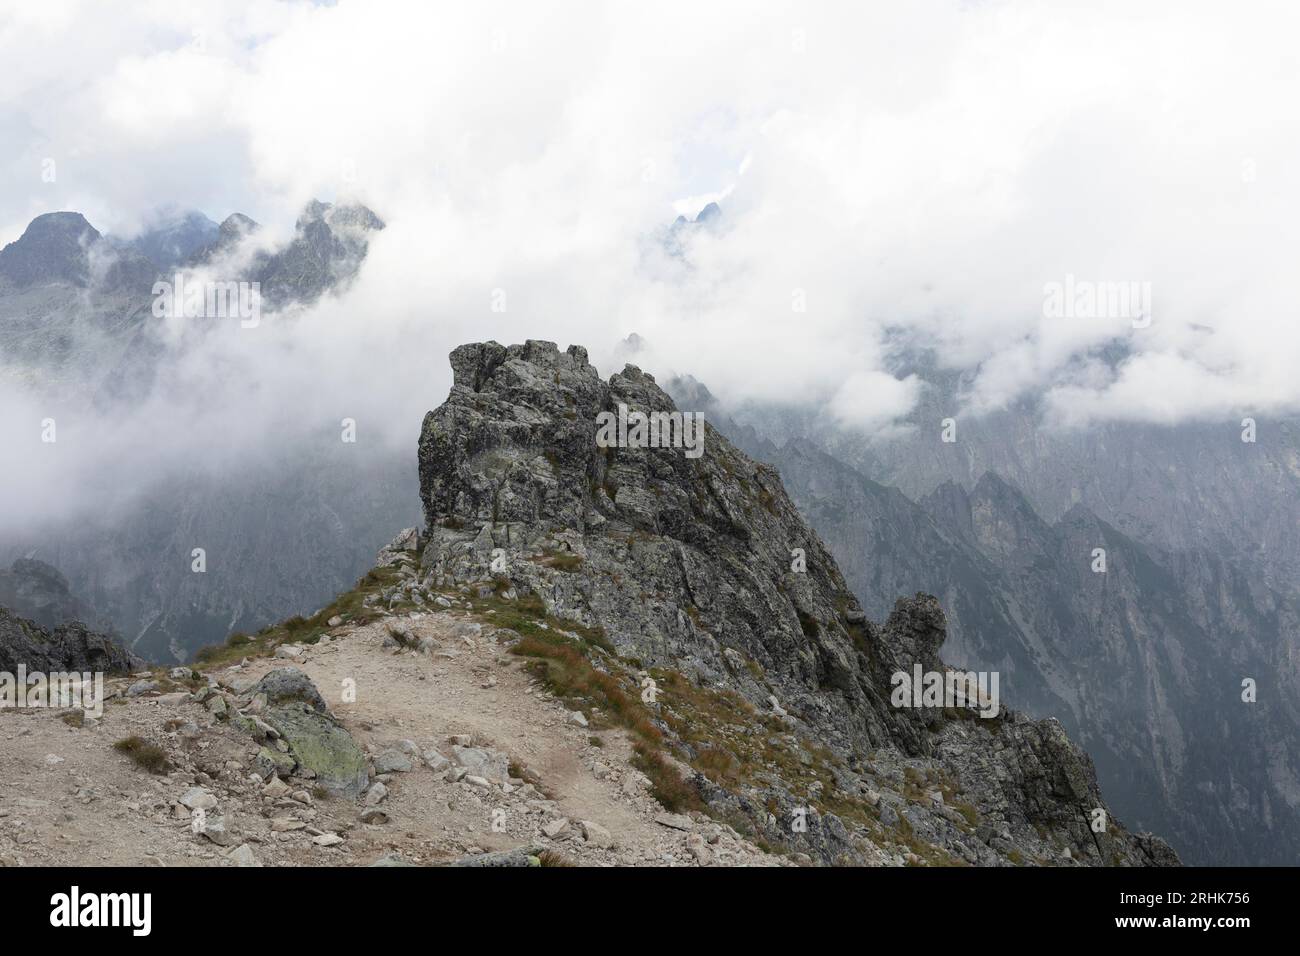 Slavkovsky stit, Vysoke Tatry, High Tatras, Slovakia. Rock and summit, peak and top of mountain the background. Hills covered by mist and foggy in fog Stock Photo